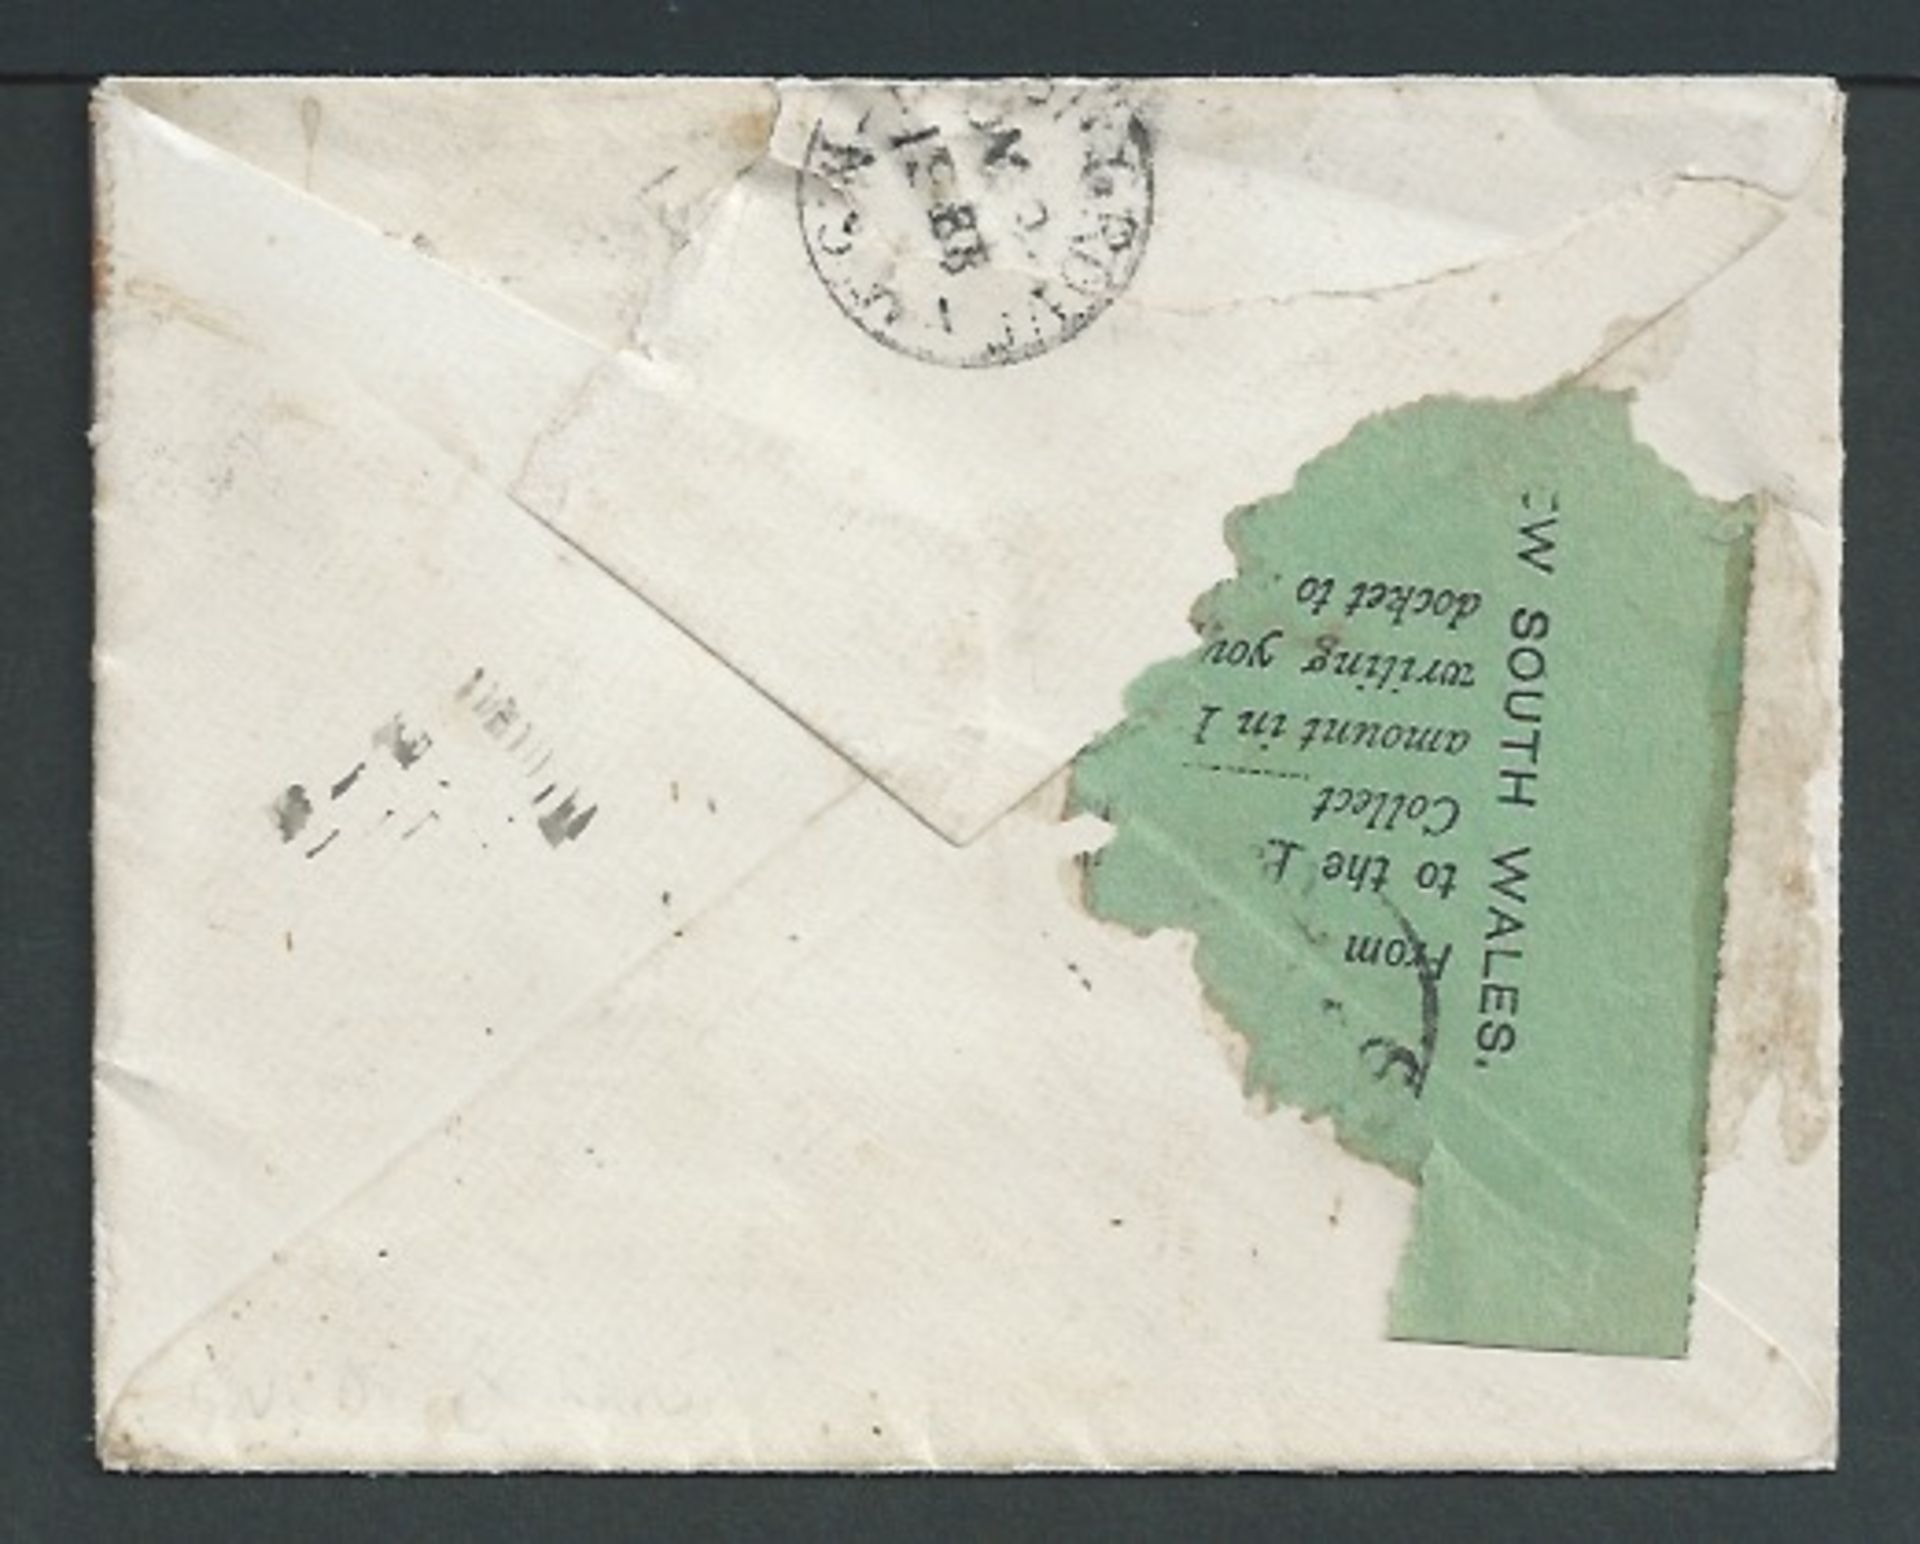 G.B. - Postage Dus / Scotland 1888 Cover to New South Wales franked by 1d lilac strip of six cancel - Image 2 of 2